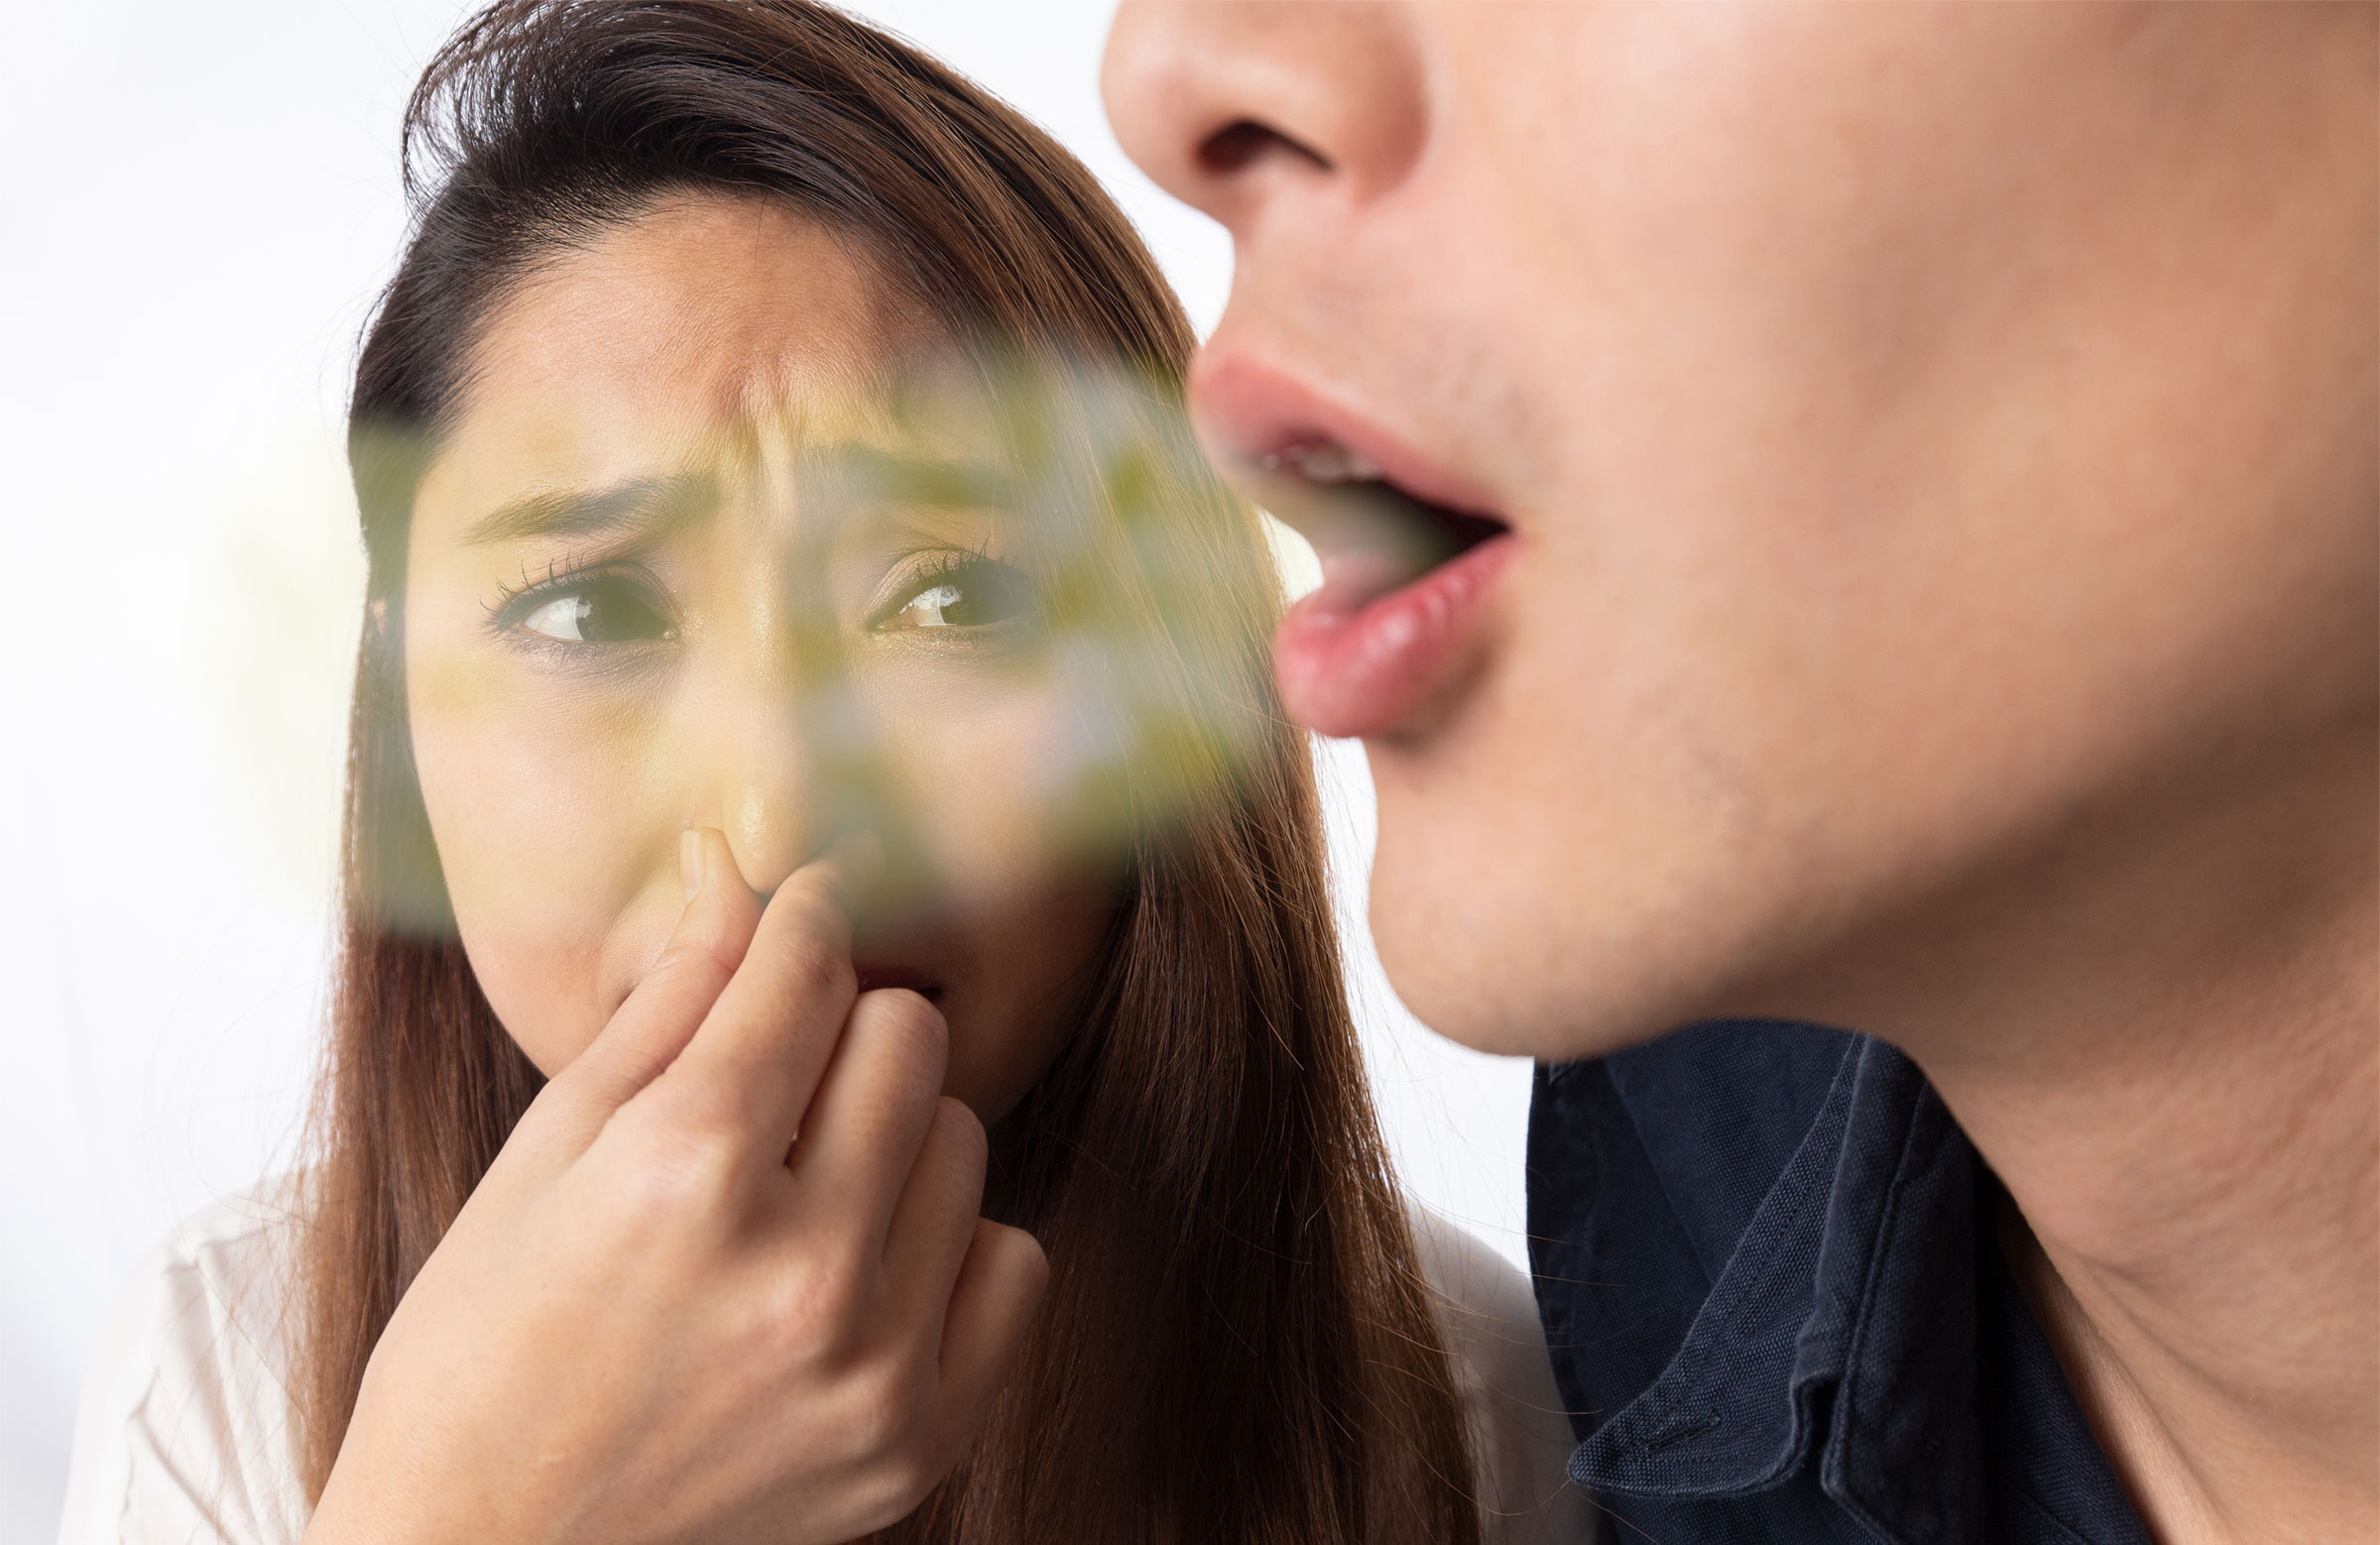 Things You Can Do to Prevent Bad Breath